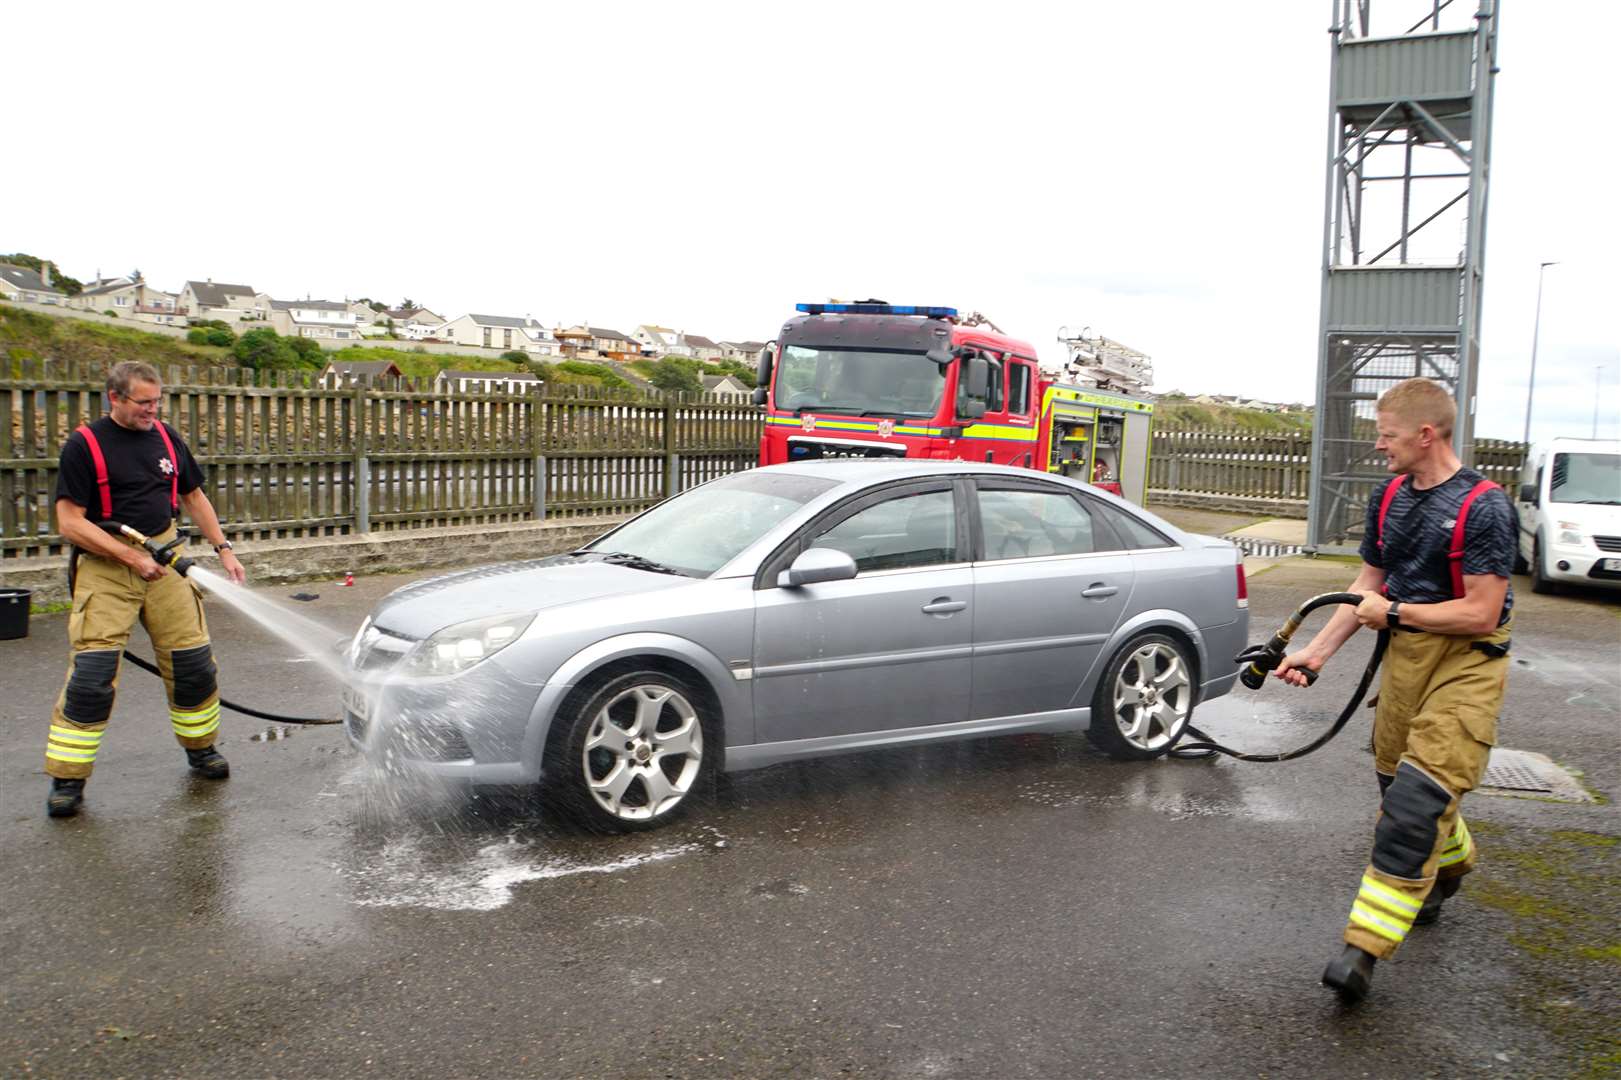 What better way to clean a car than with a fireman's hose?